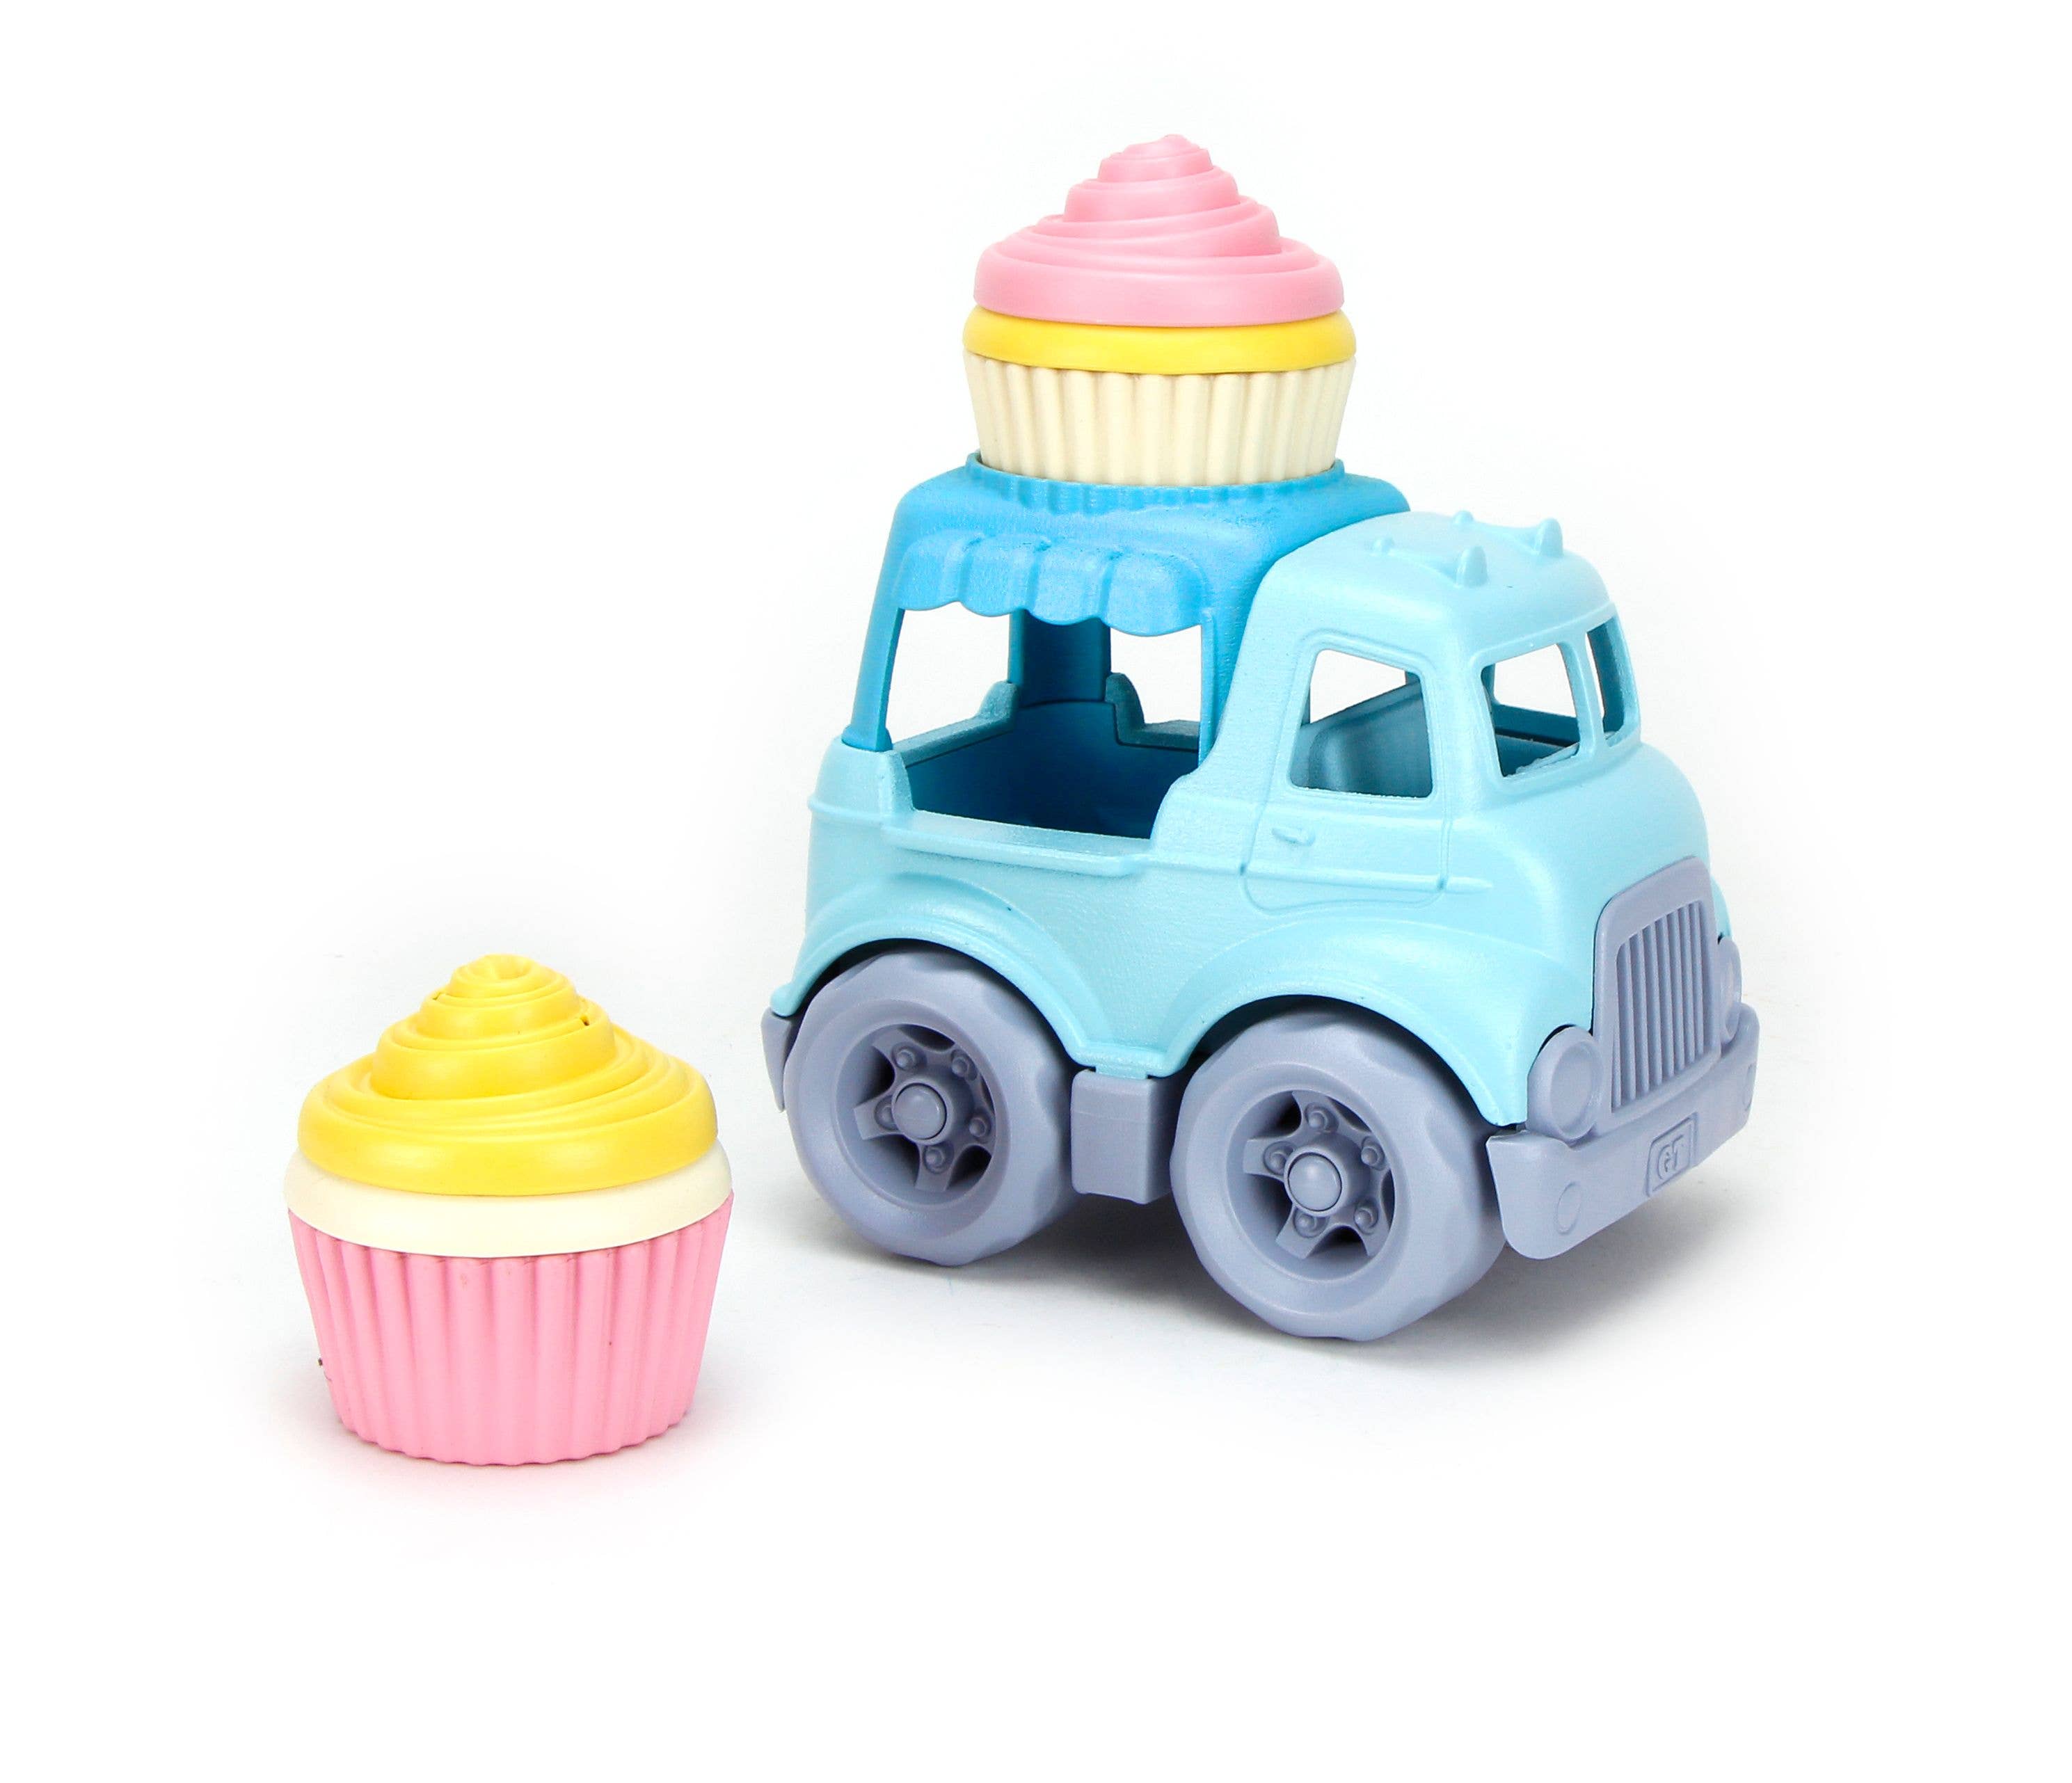 Cupcake Truck Toy